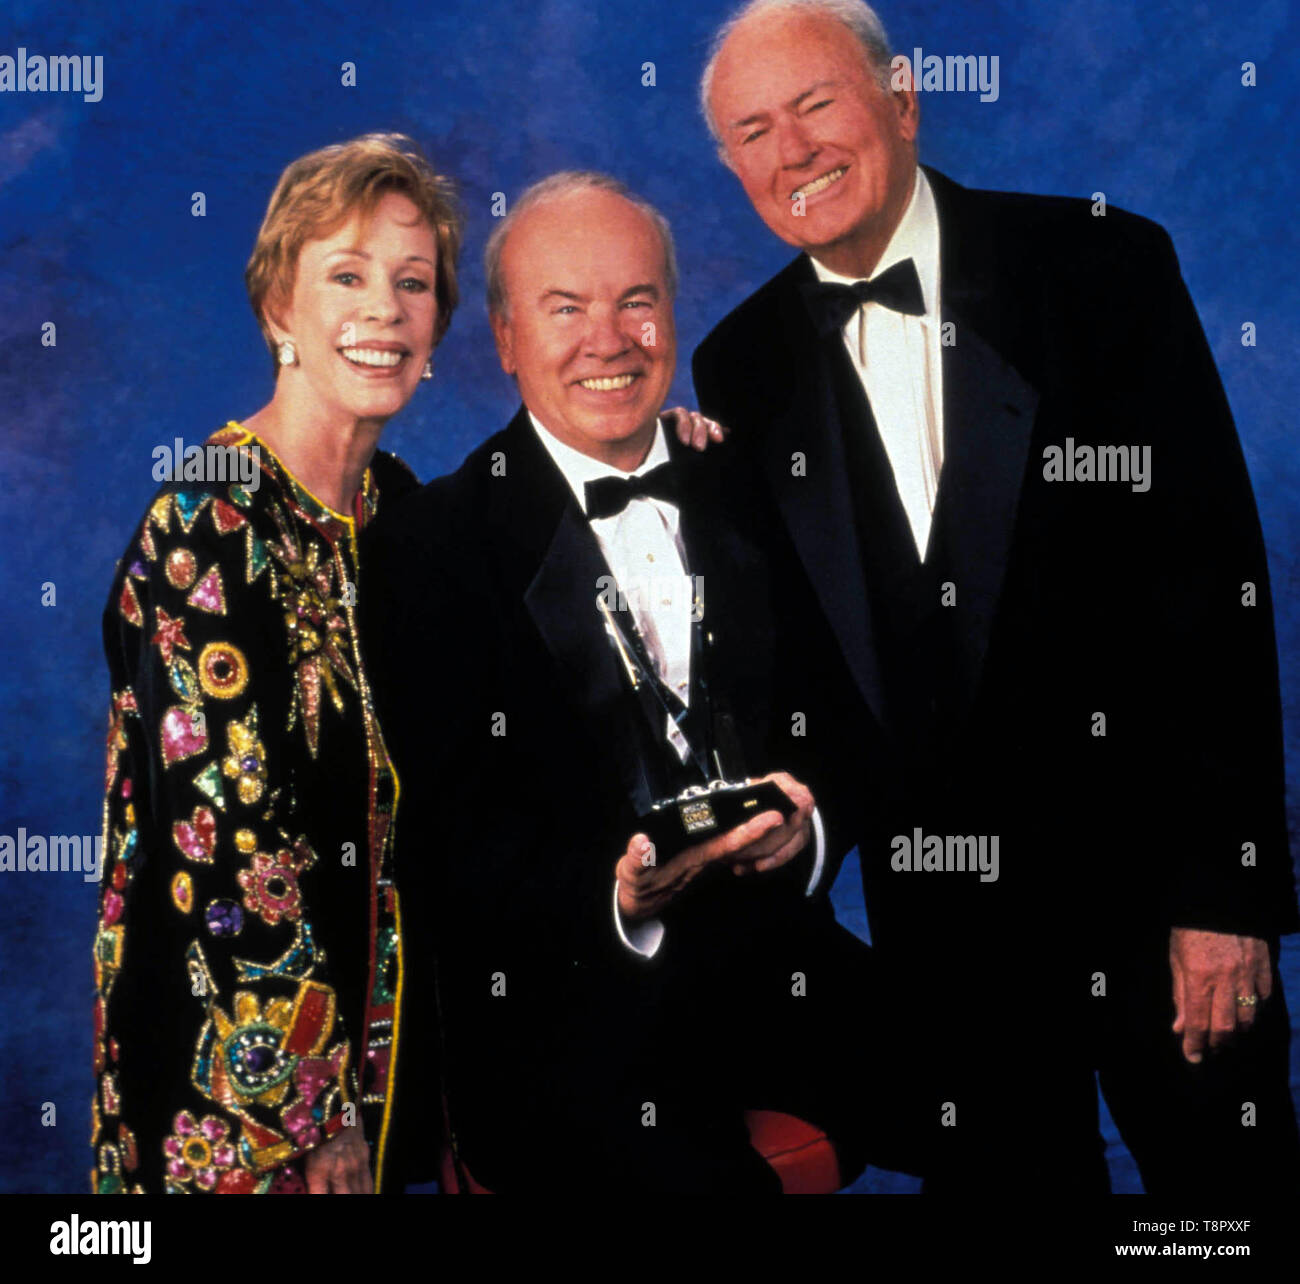 May 14, 2019: Los Angeles, California USA: FILE: Actor and comedian TIM CONWAY, best known for his Emmy winning work on 'The Carol Burnett Show, ' died on Tuesday morning. He was 85. PICTURED: CAROL BURNETT, TIM CONWAY and HARVEY KORMAN at the American Comedy Awards, circa 1990's. Credit: Globe Photos/ZUMAPRESS.com/Alamy Live News Stock Photo